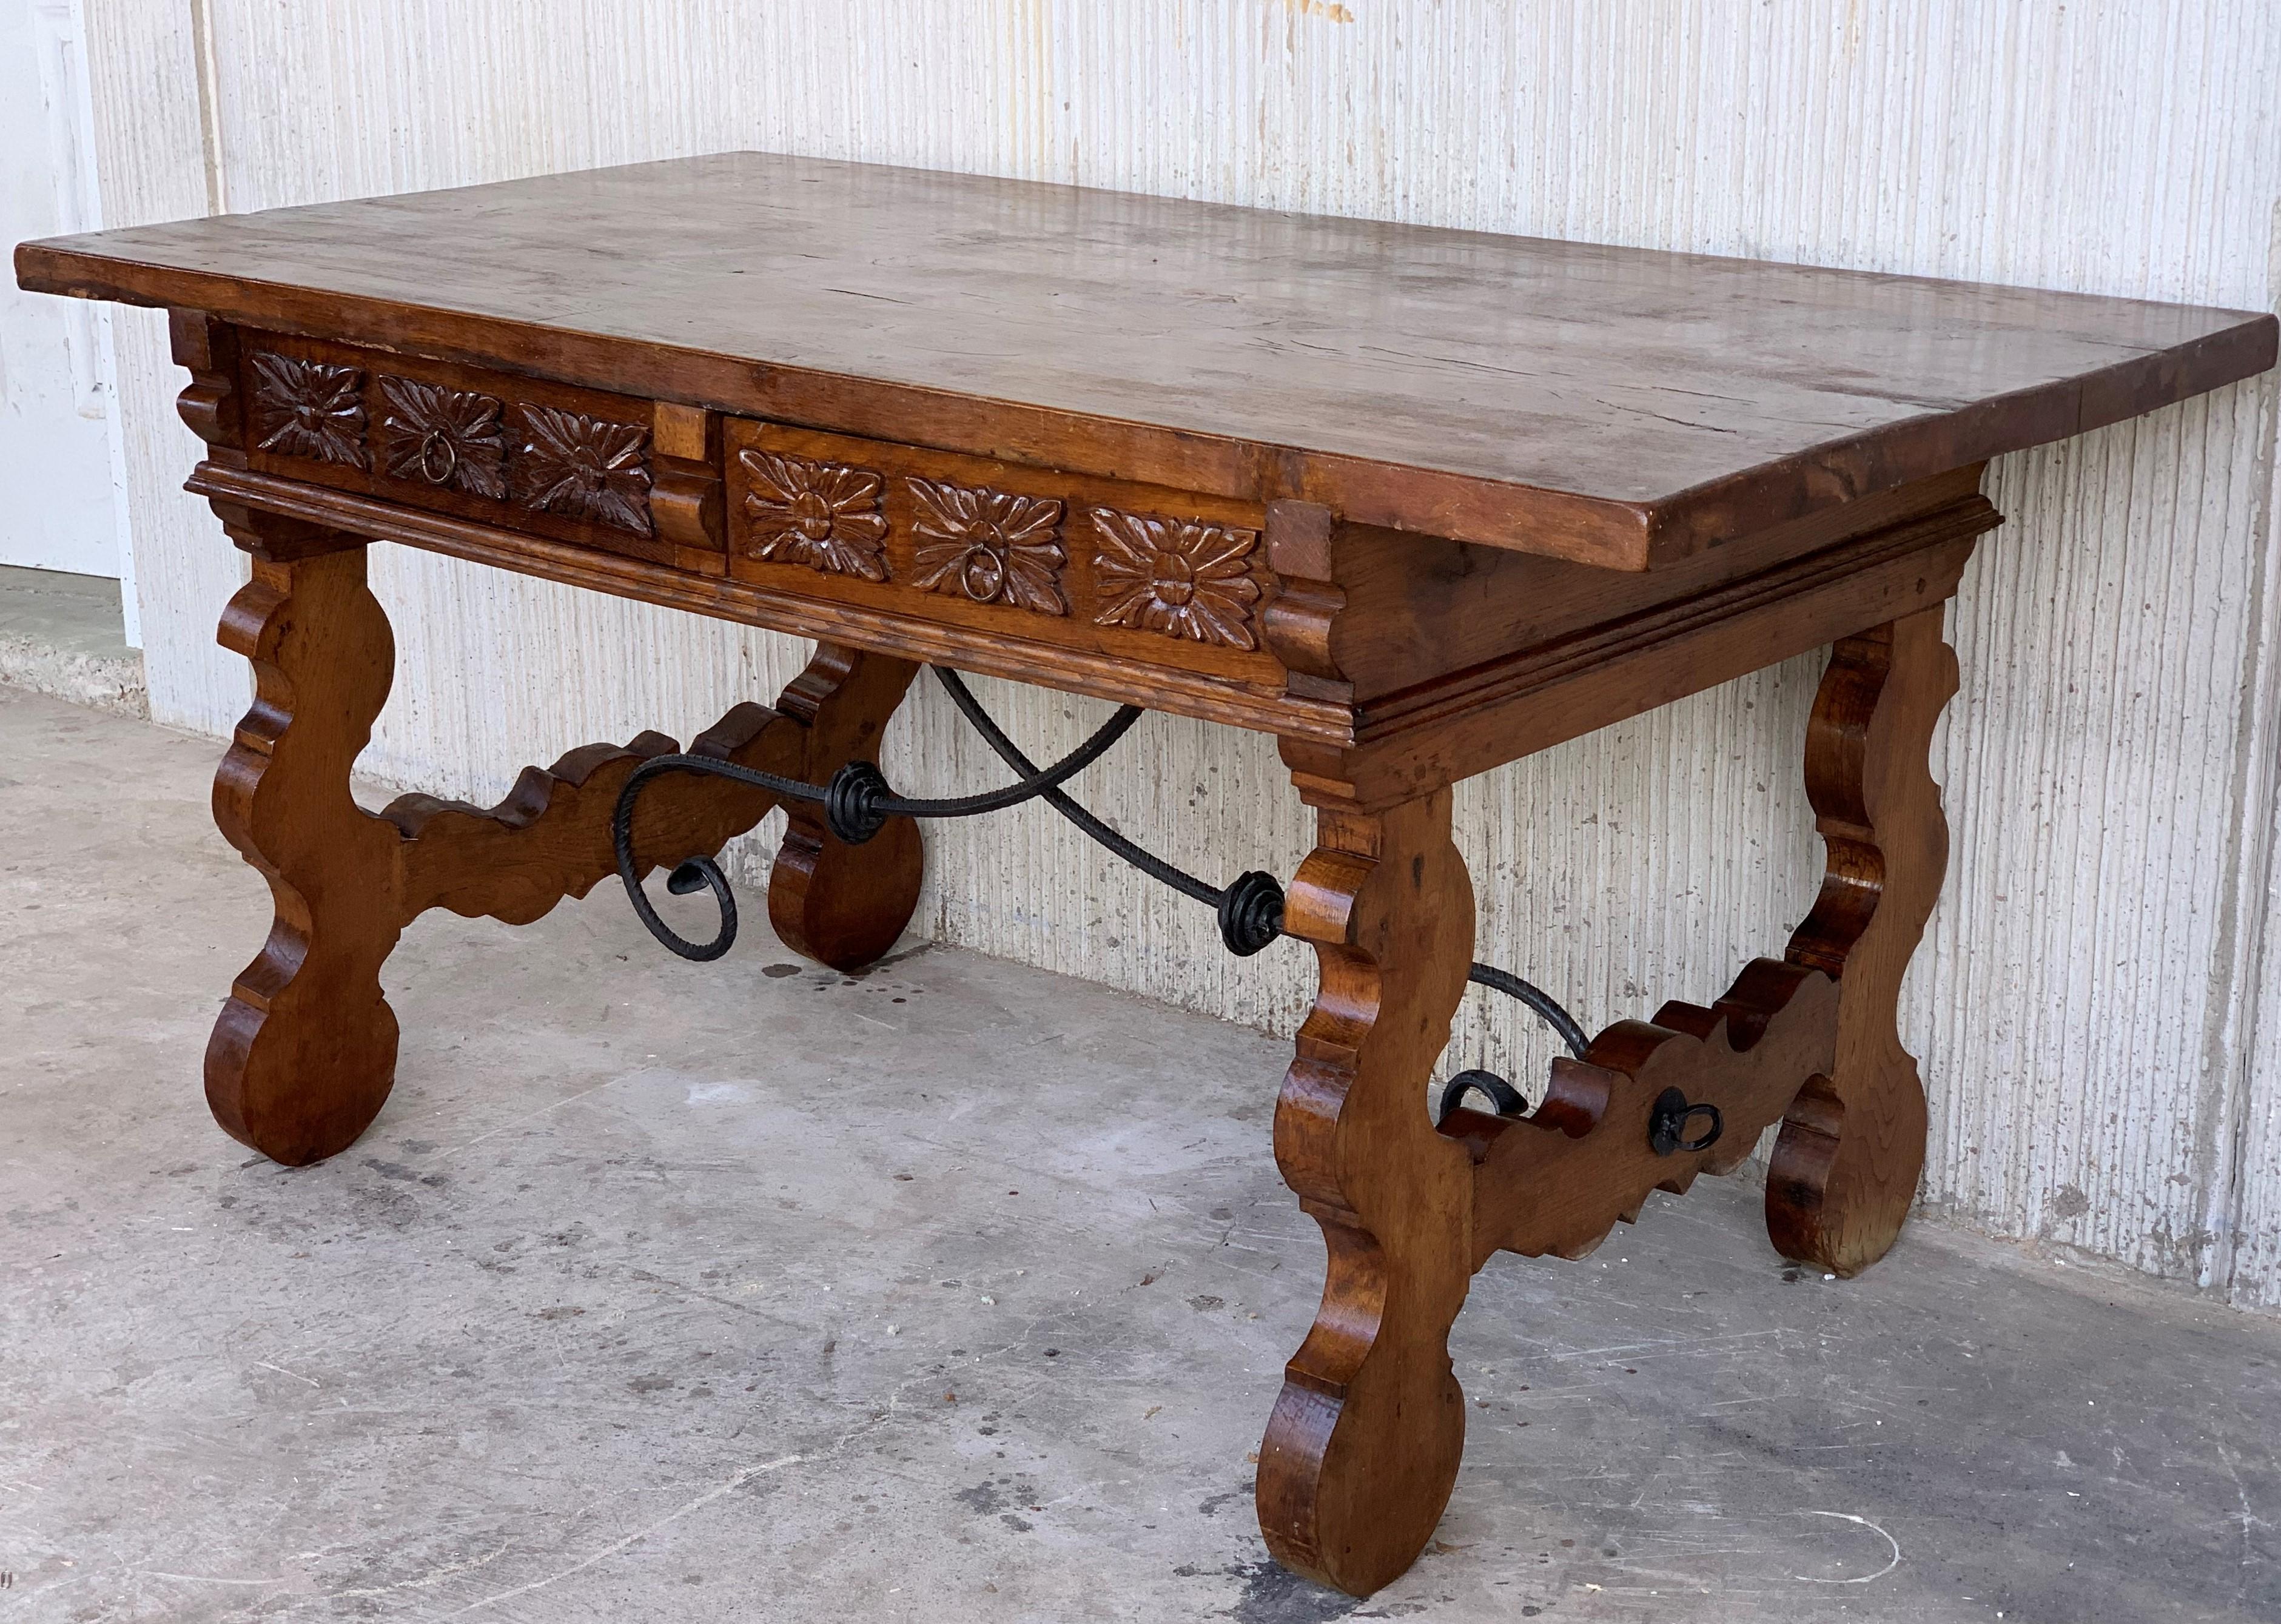 Baroque 19th Catalan Spanish Desk or Console Table in Carved Walnut and Iron Stretcher